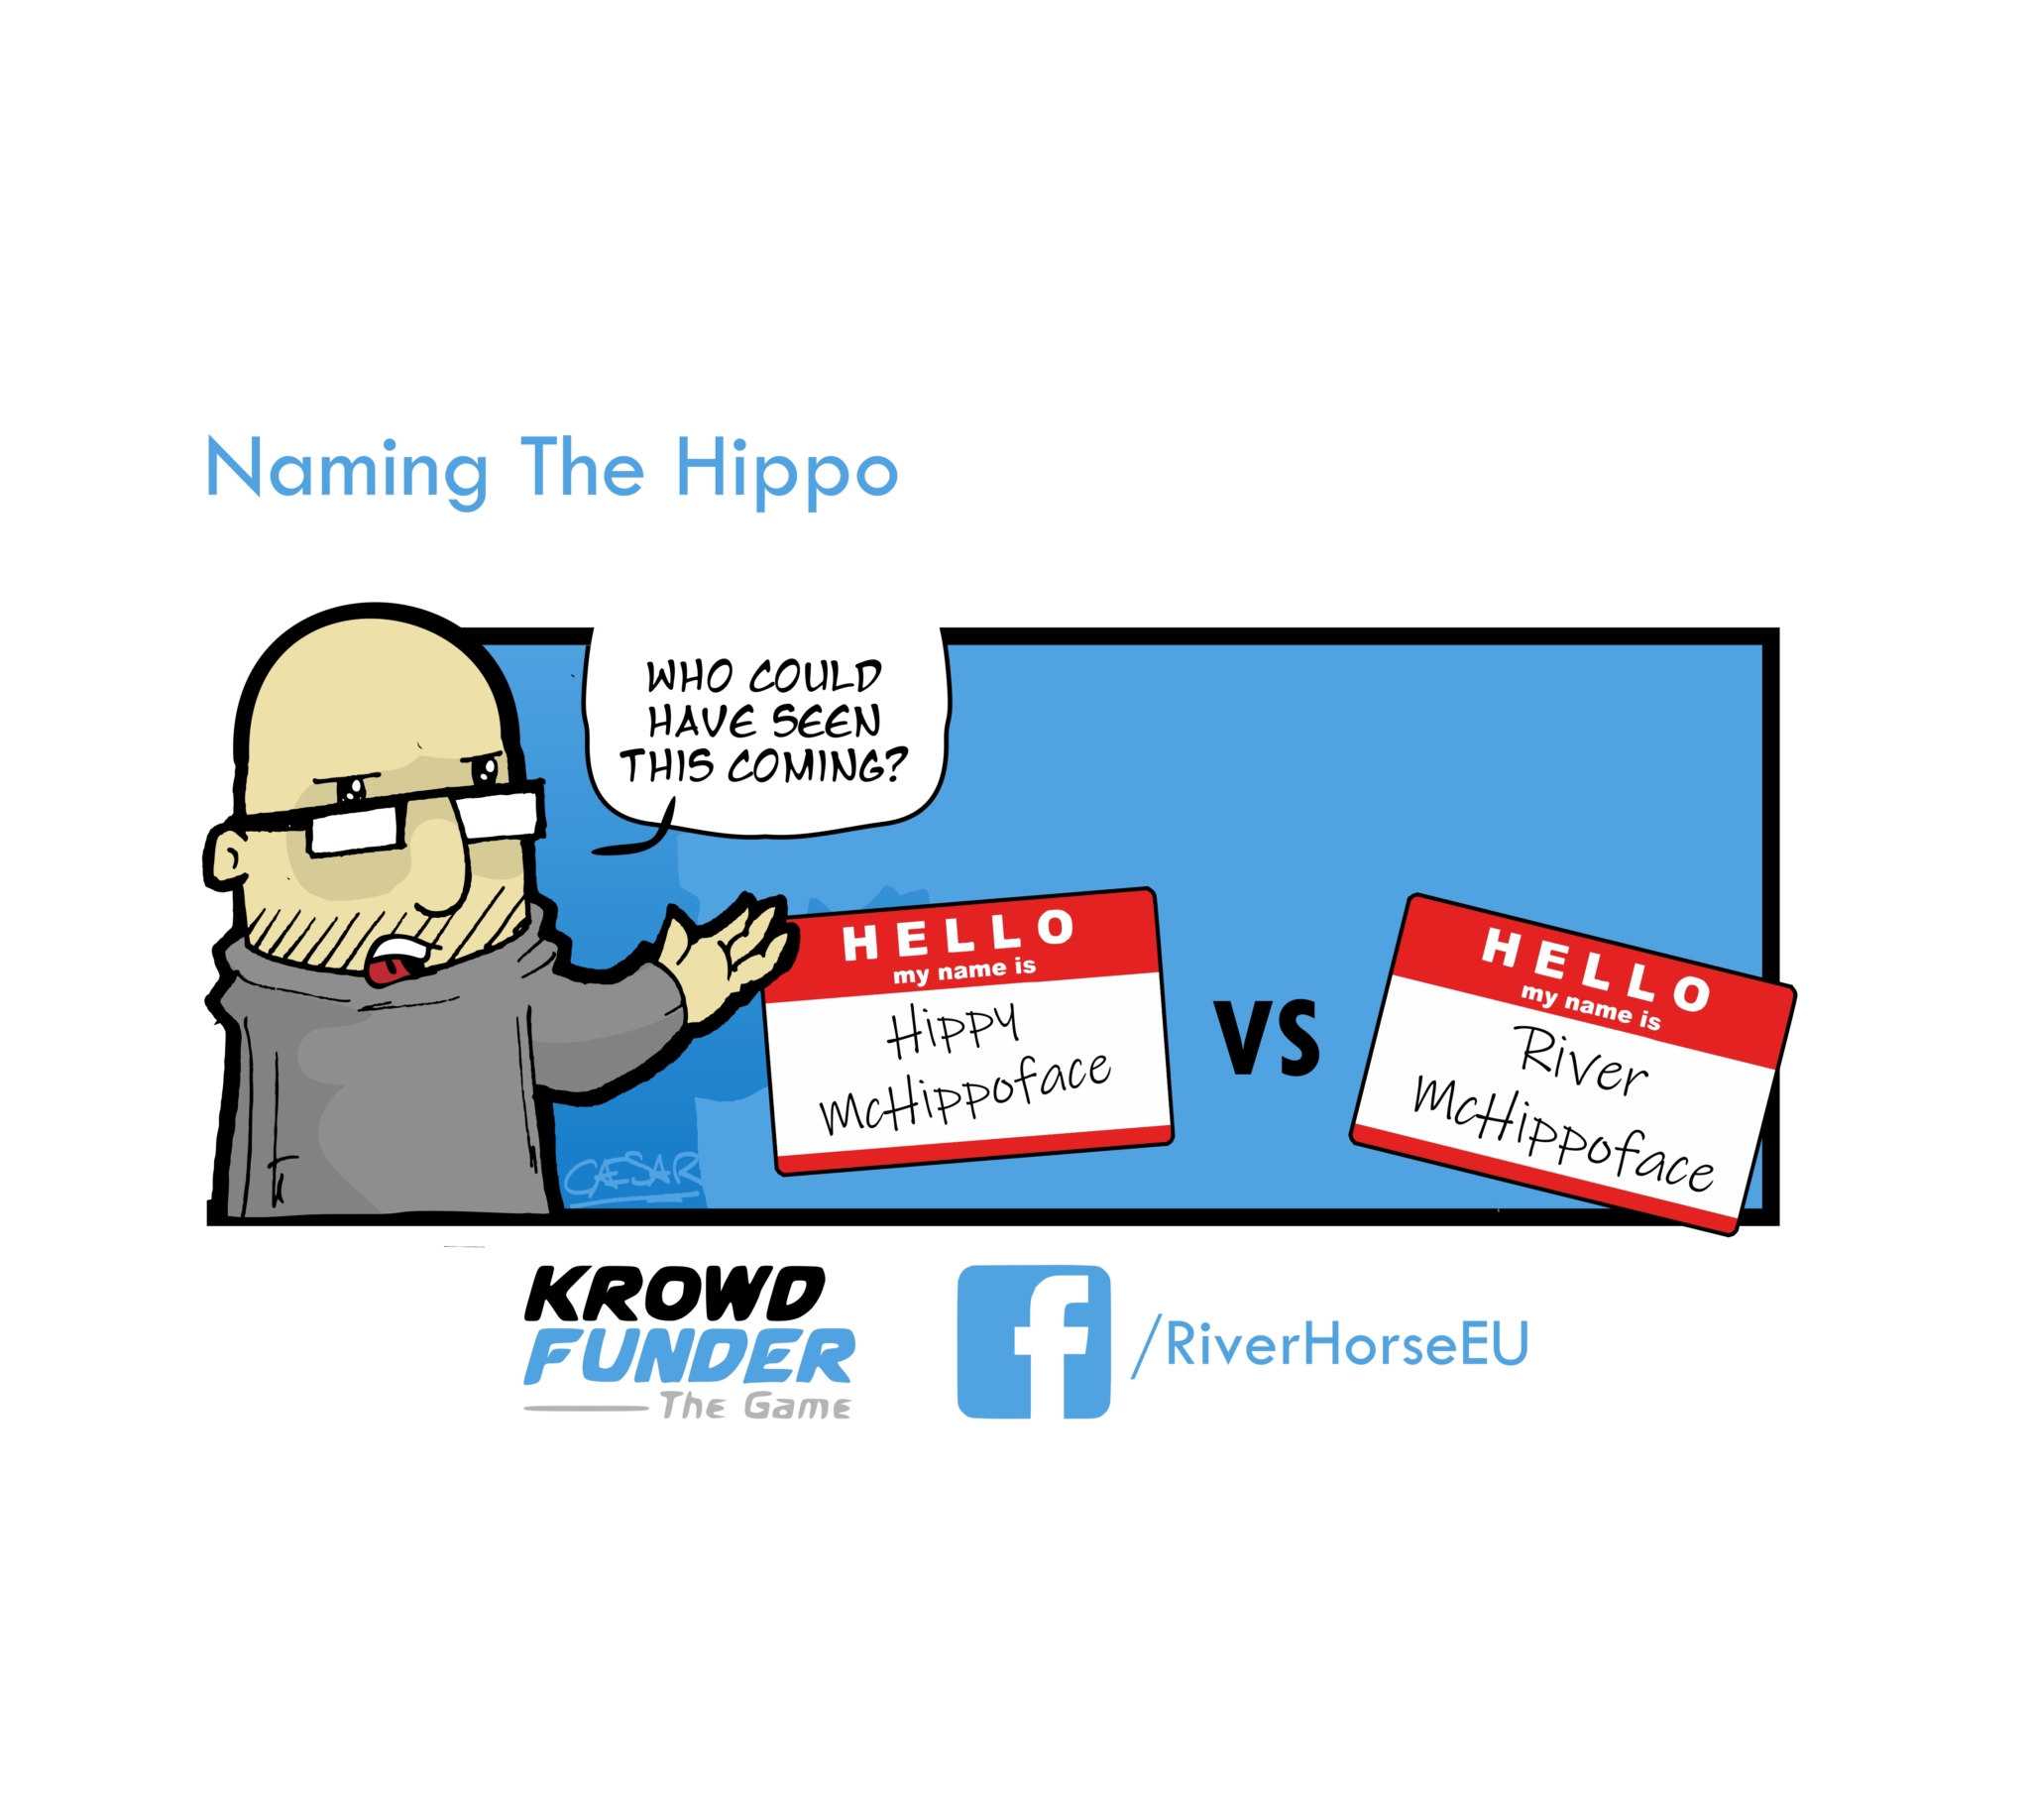 #5 - Naming the Hippo